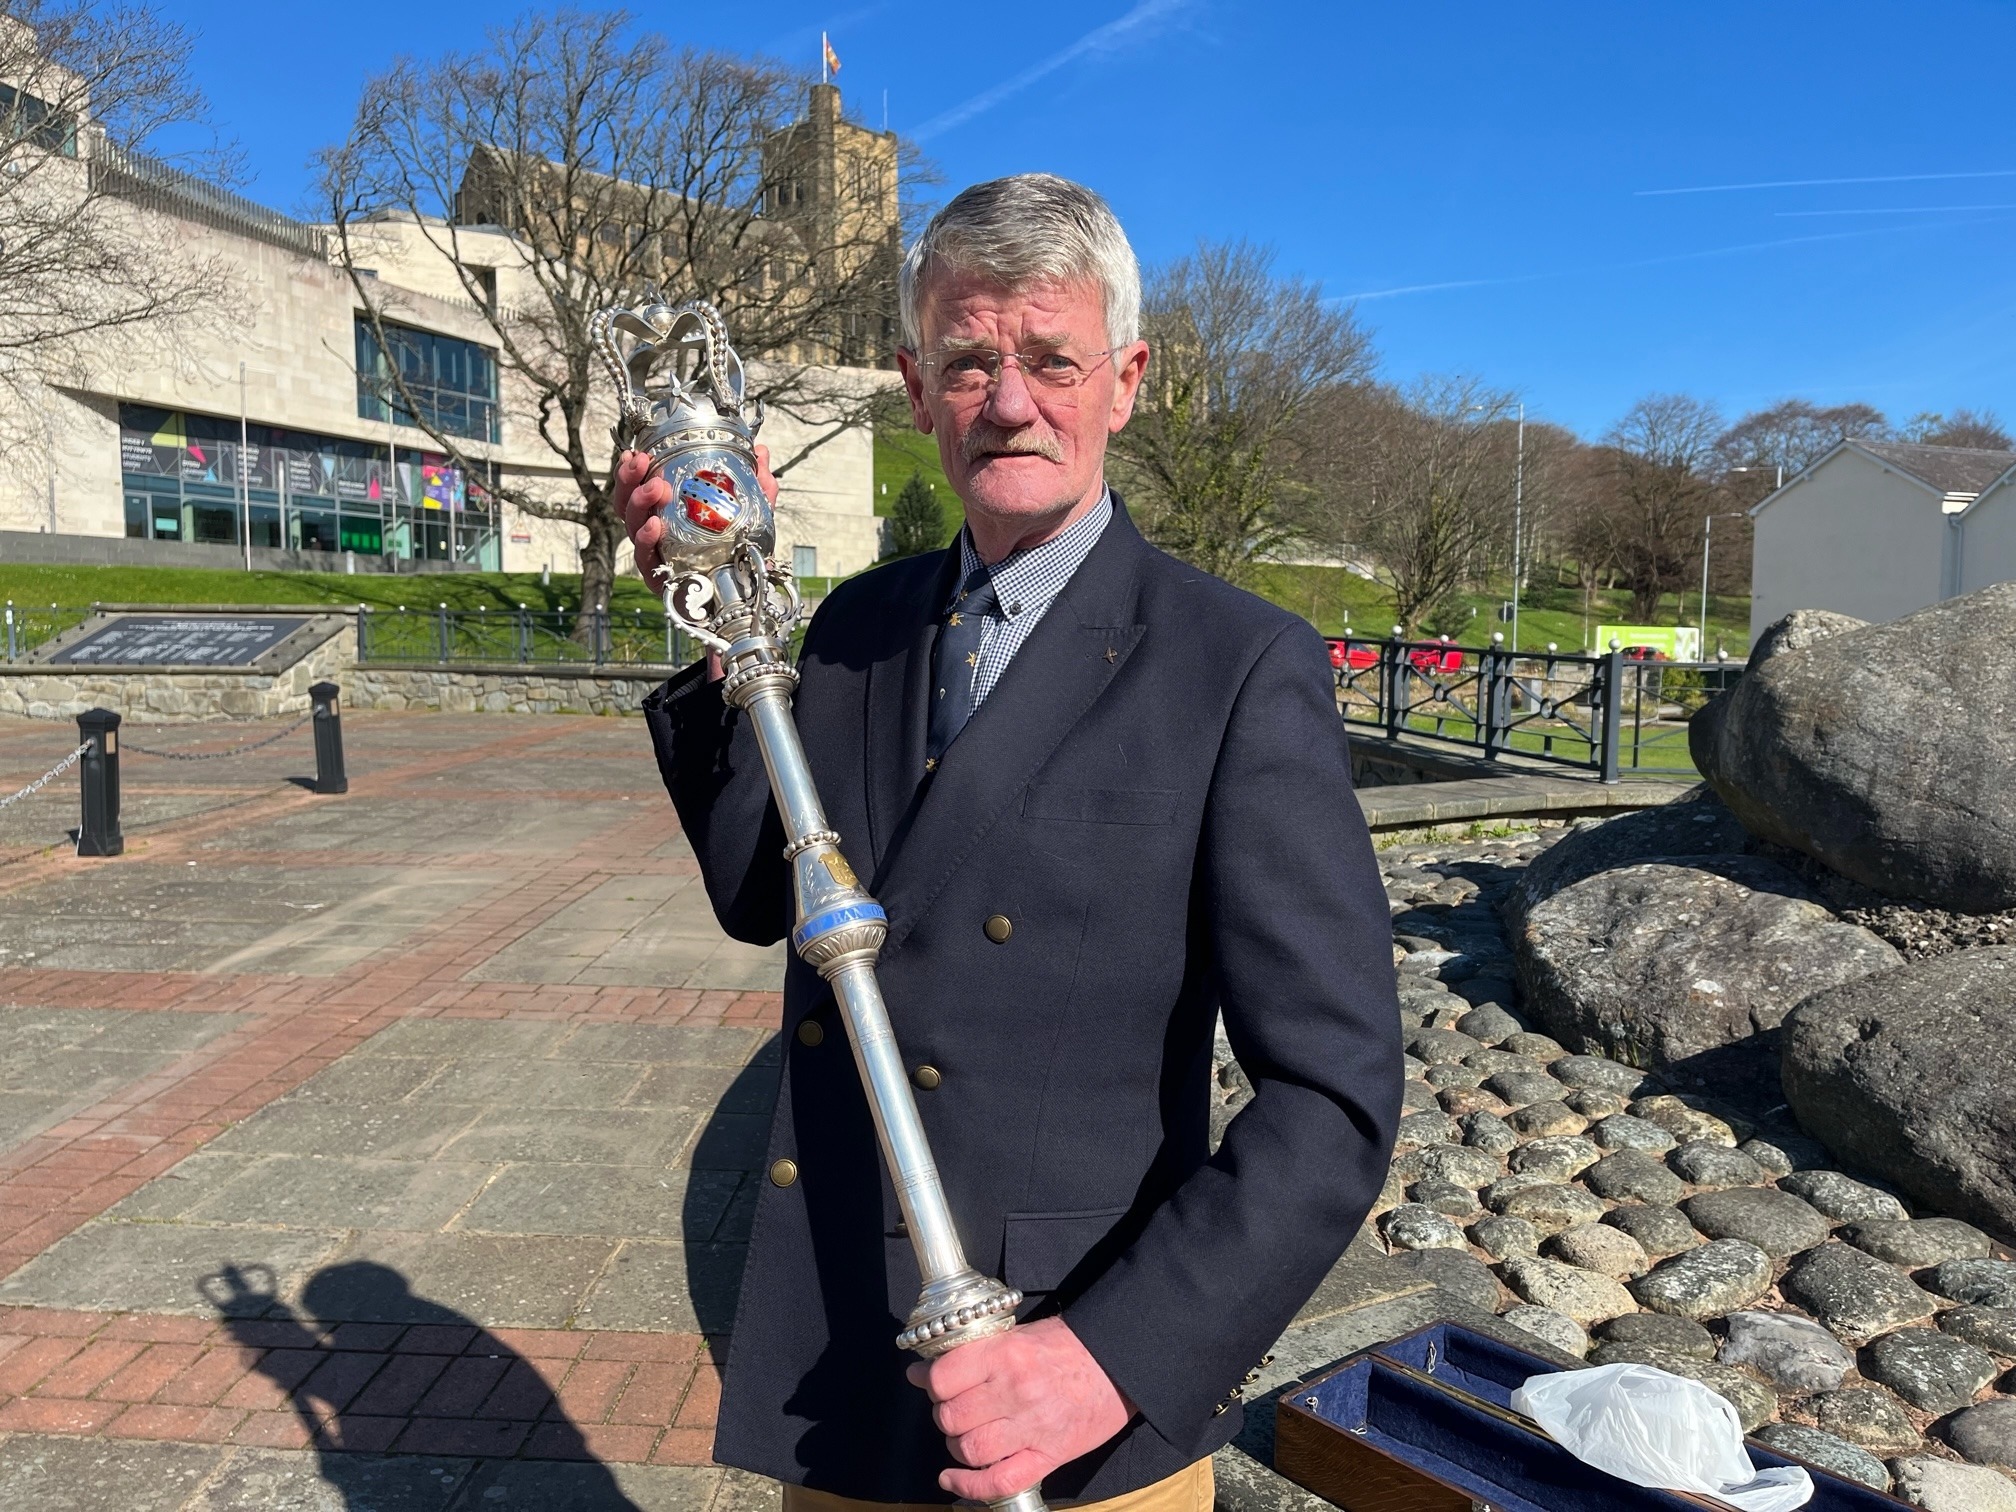 Cllr Mark Roberts is pictured with Bangor\s civic mace which is to get a makeover by Wartski jewellers to the royals. (Image Mark Roberts)